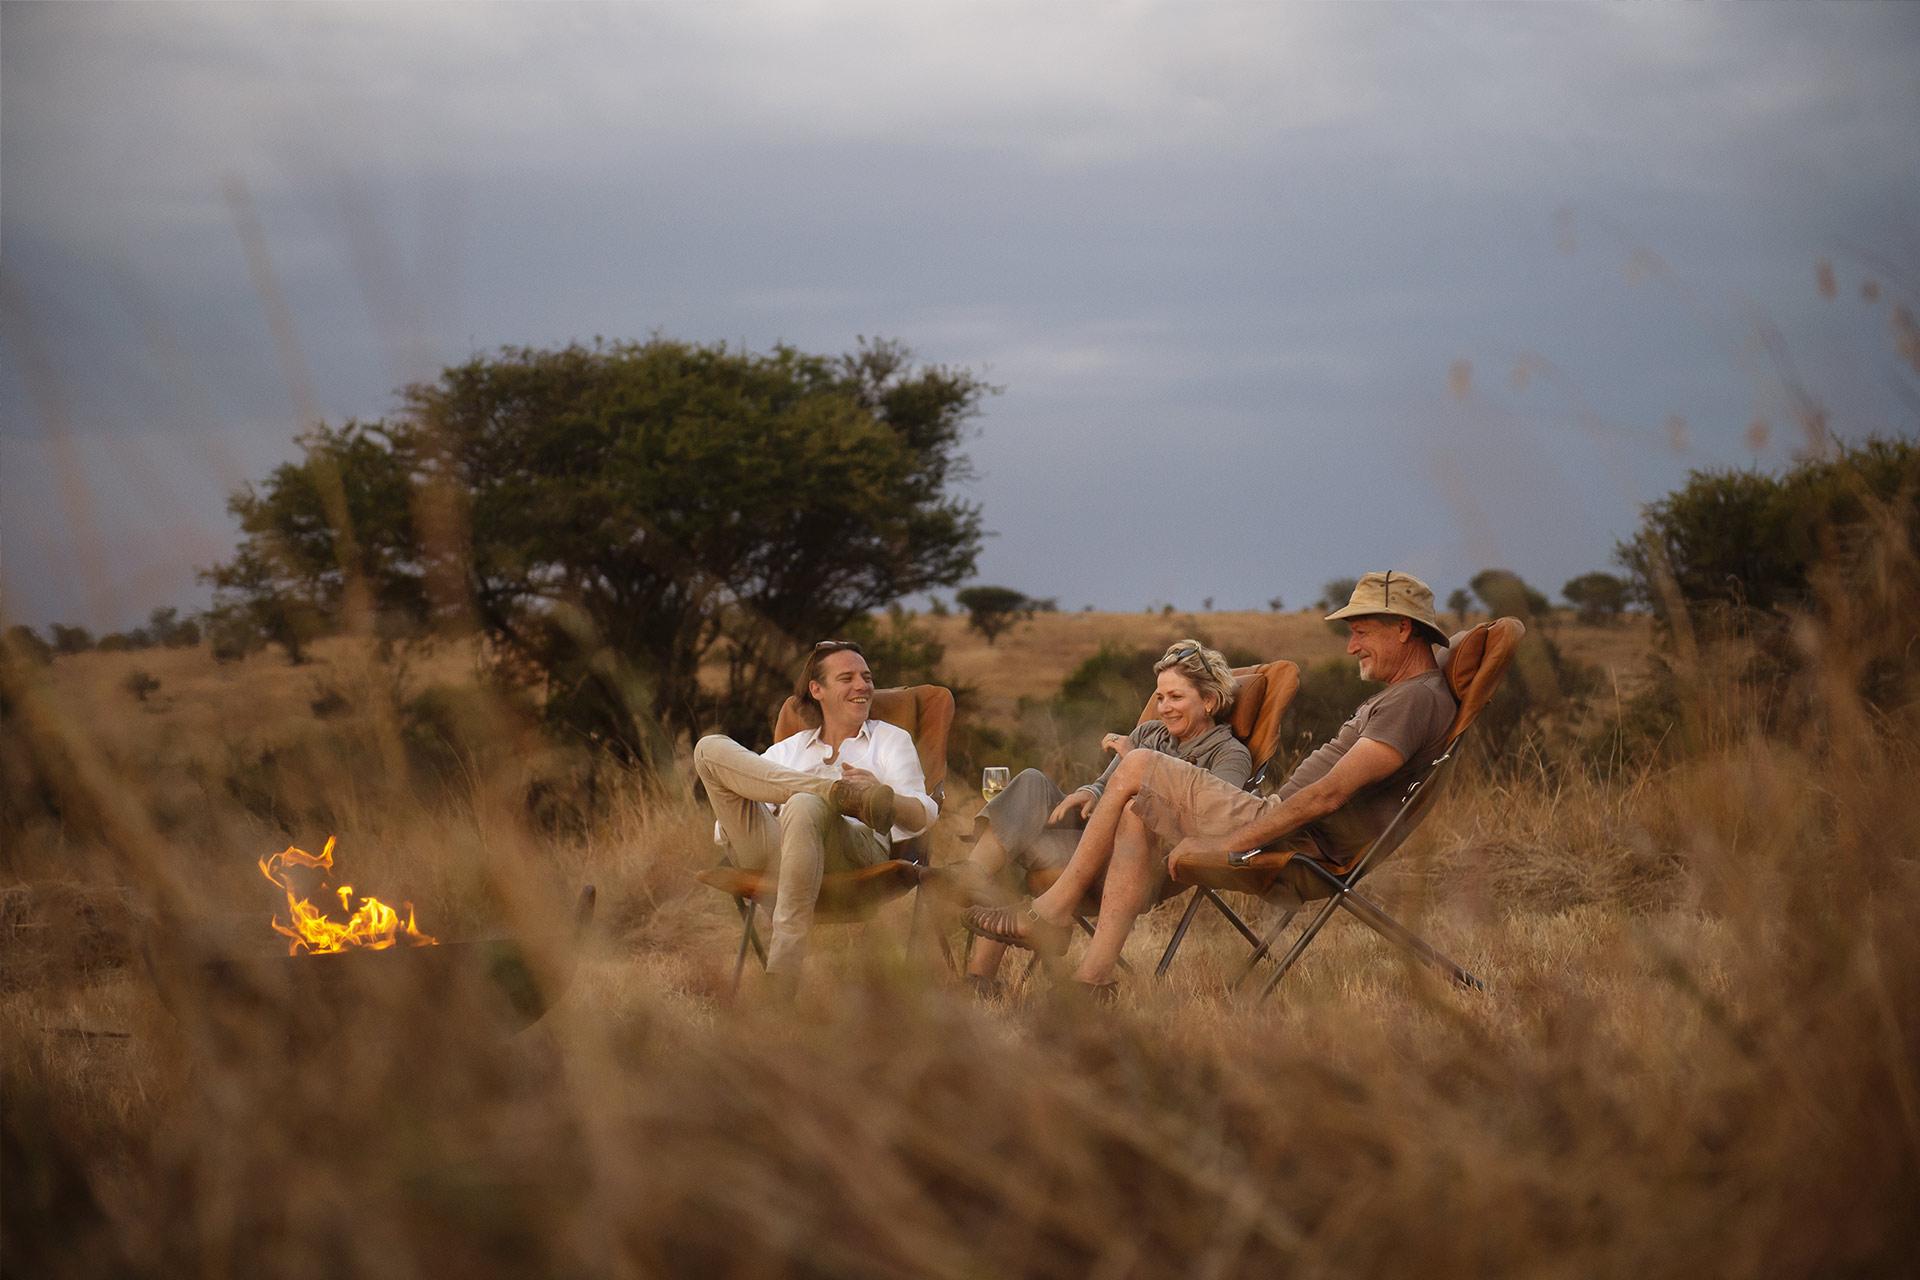 Designed with elegant simplicity, the Siringit Migration Camp moves in symbiosis with nature migrating with the herds from the spectacular Mara River crossings in Northern Serengeti to the calving season in the Southern Serengeti